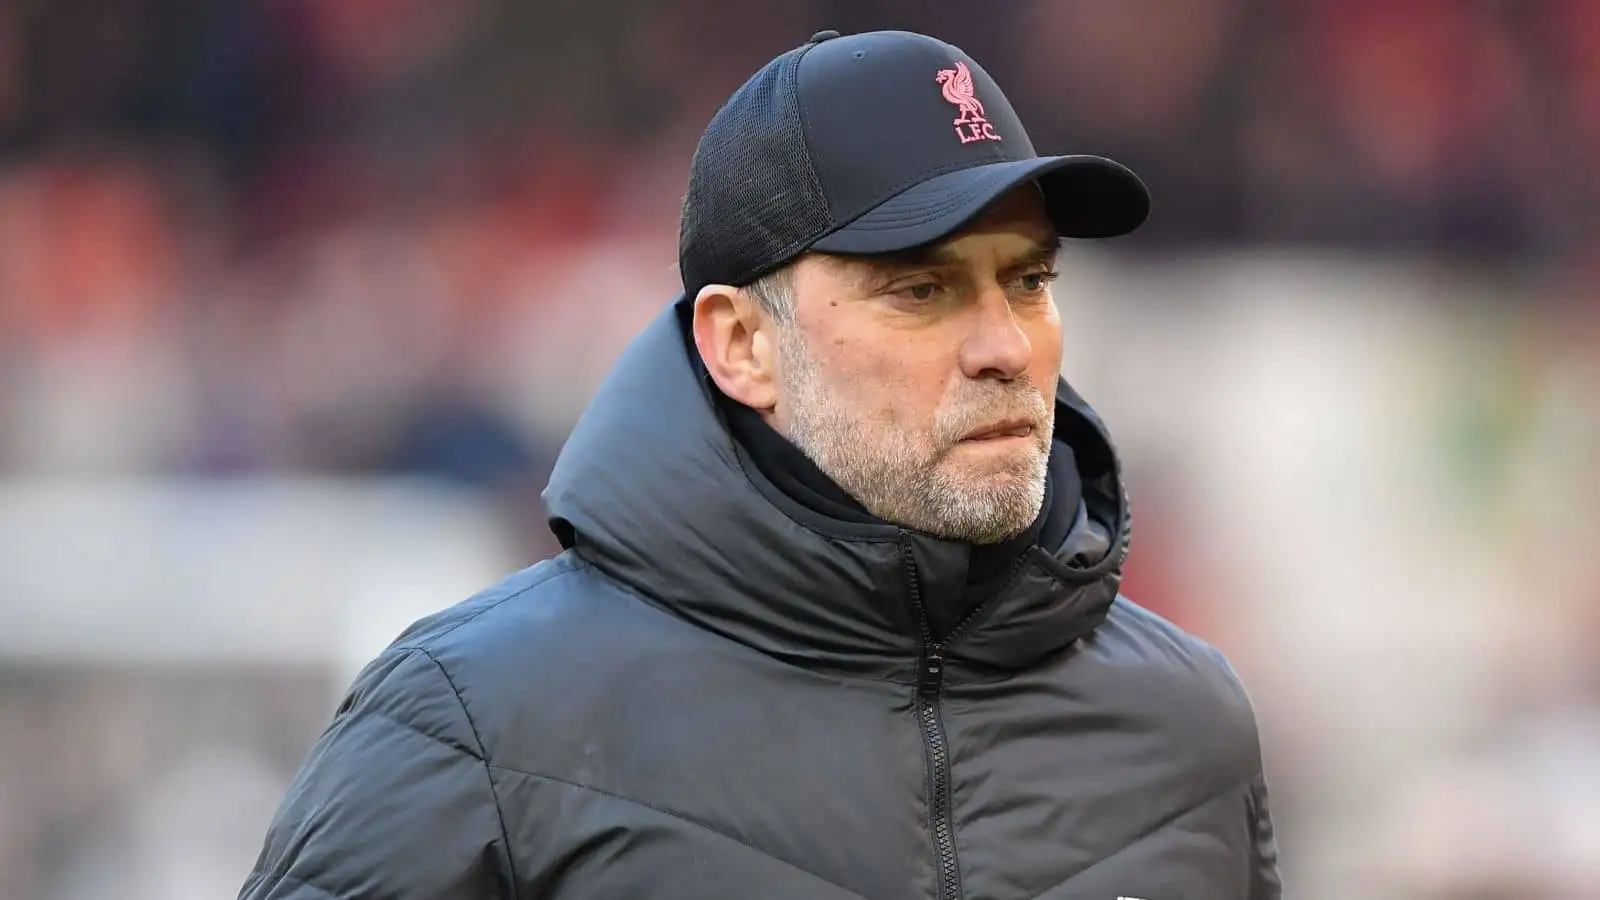 Jurgen Klopp, manager of Liverpool during the FA Cup match between Nottingham Forest and Liverpool at the City Ground, Nottingham